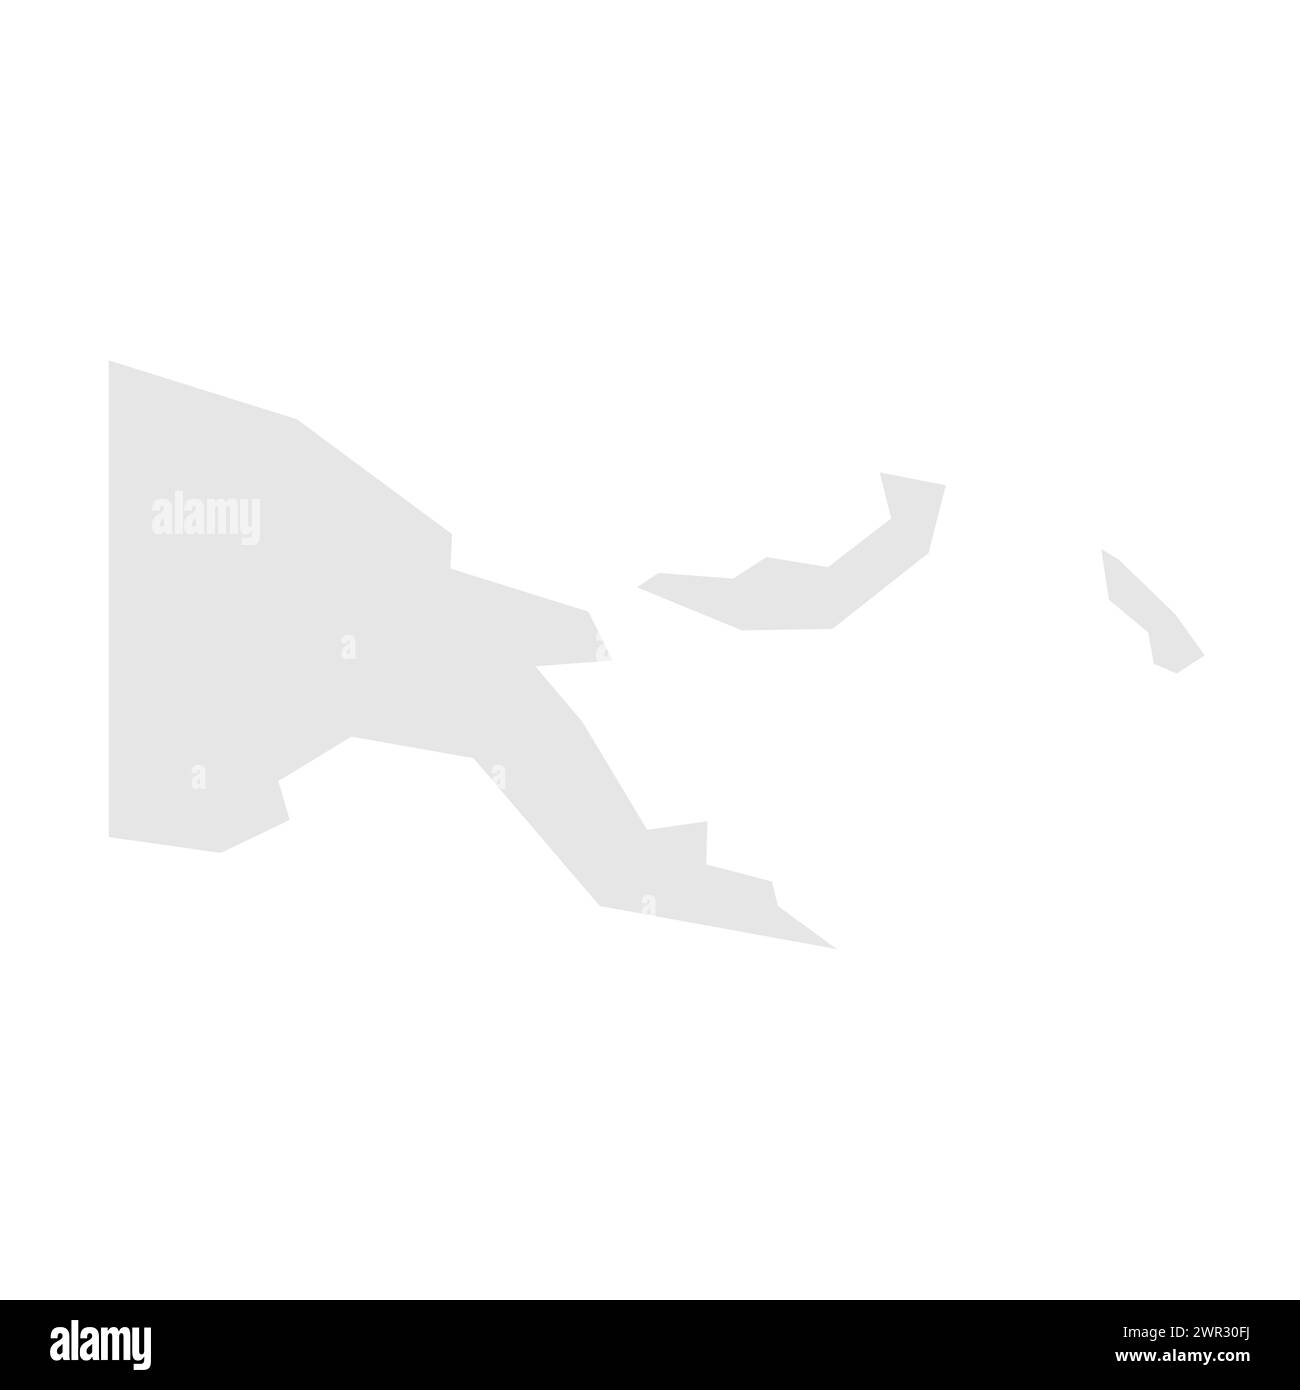 Papua New Guinea country simplified map. Light grey silhouette with sharp corners isolated on white background. Simple vector icon Stock Vector